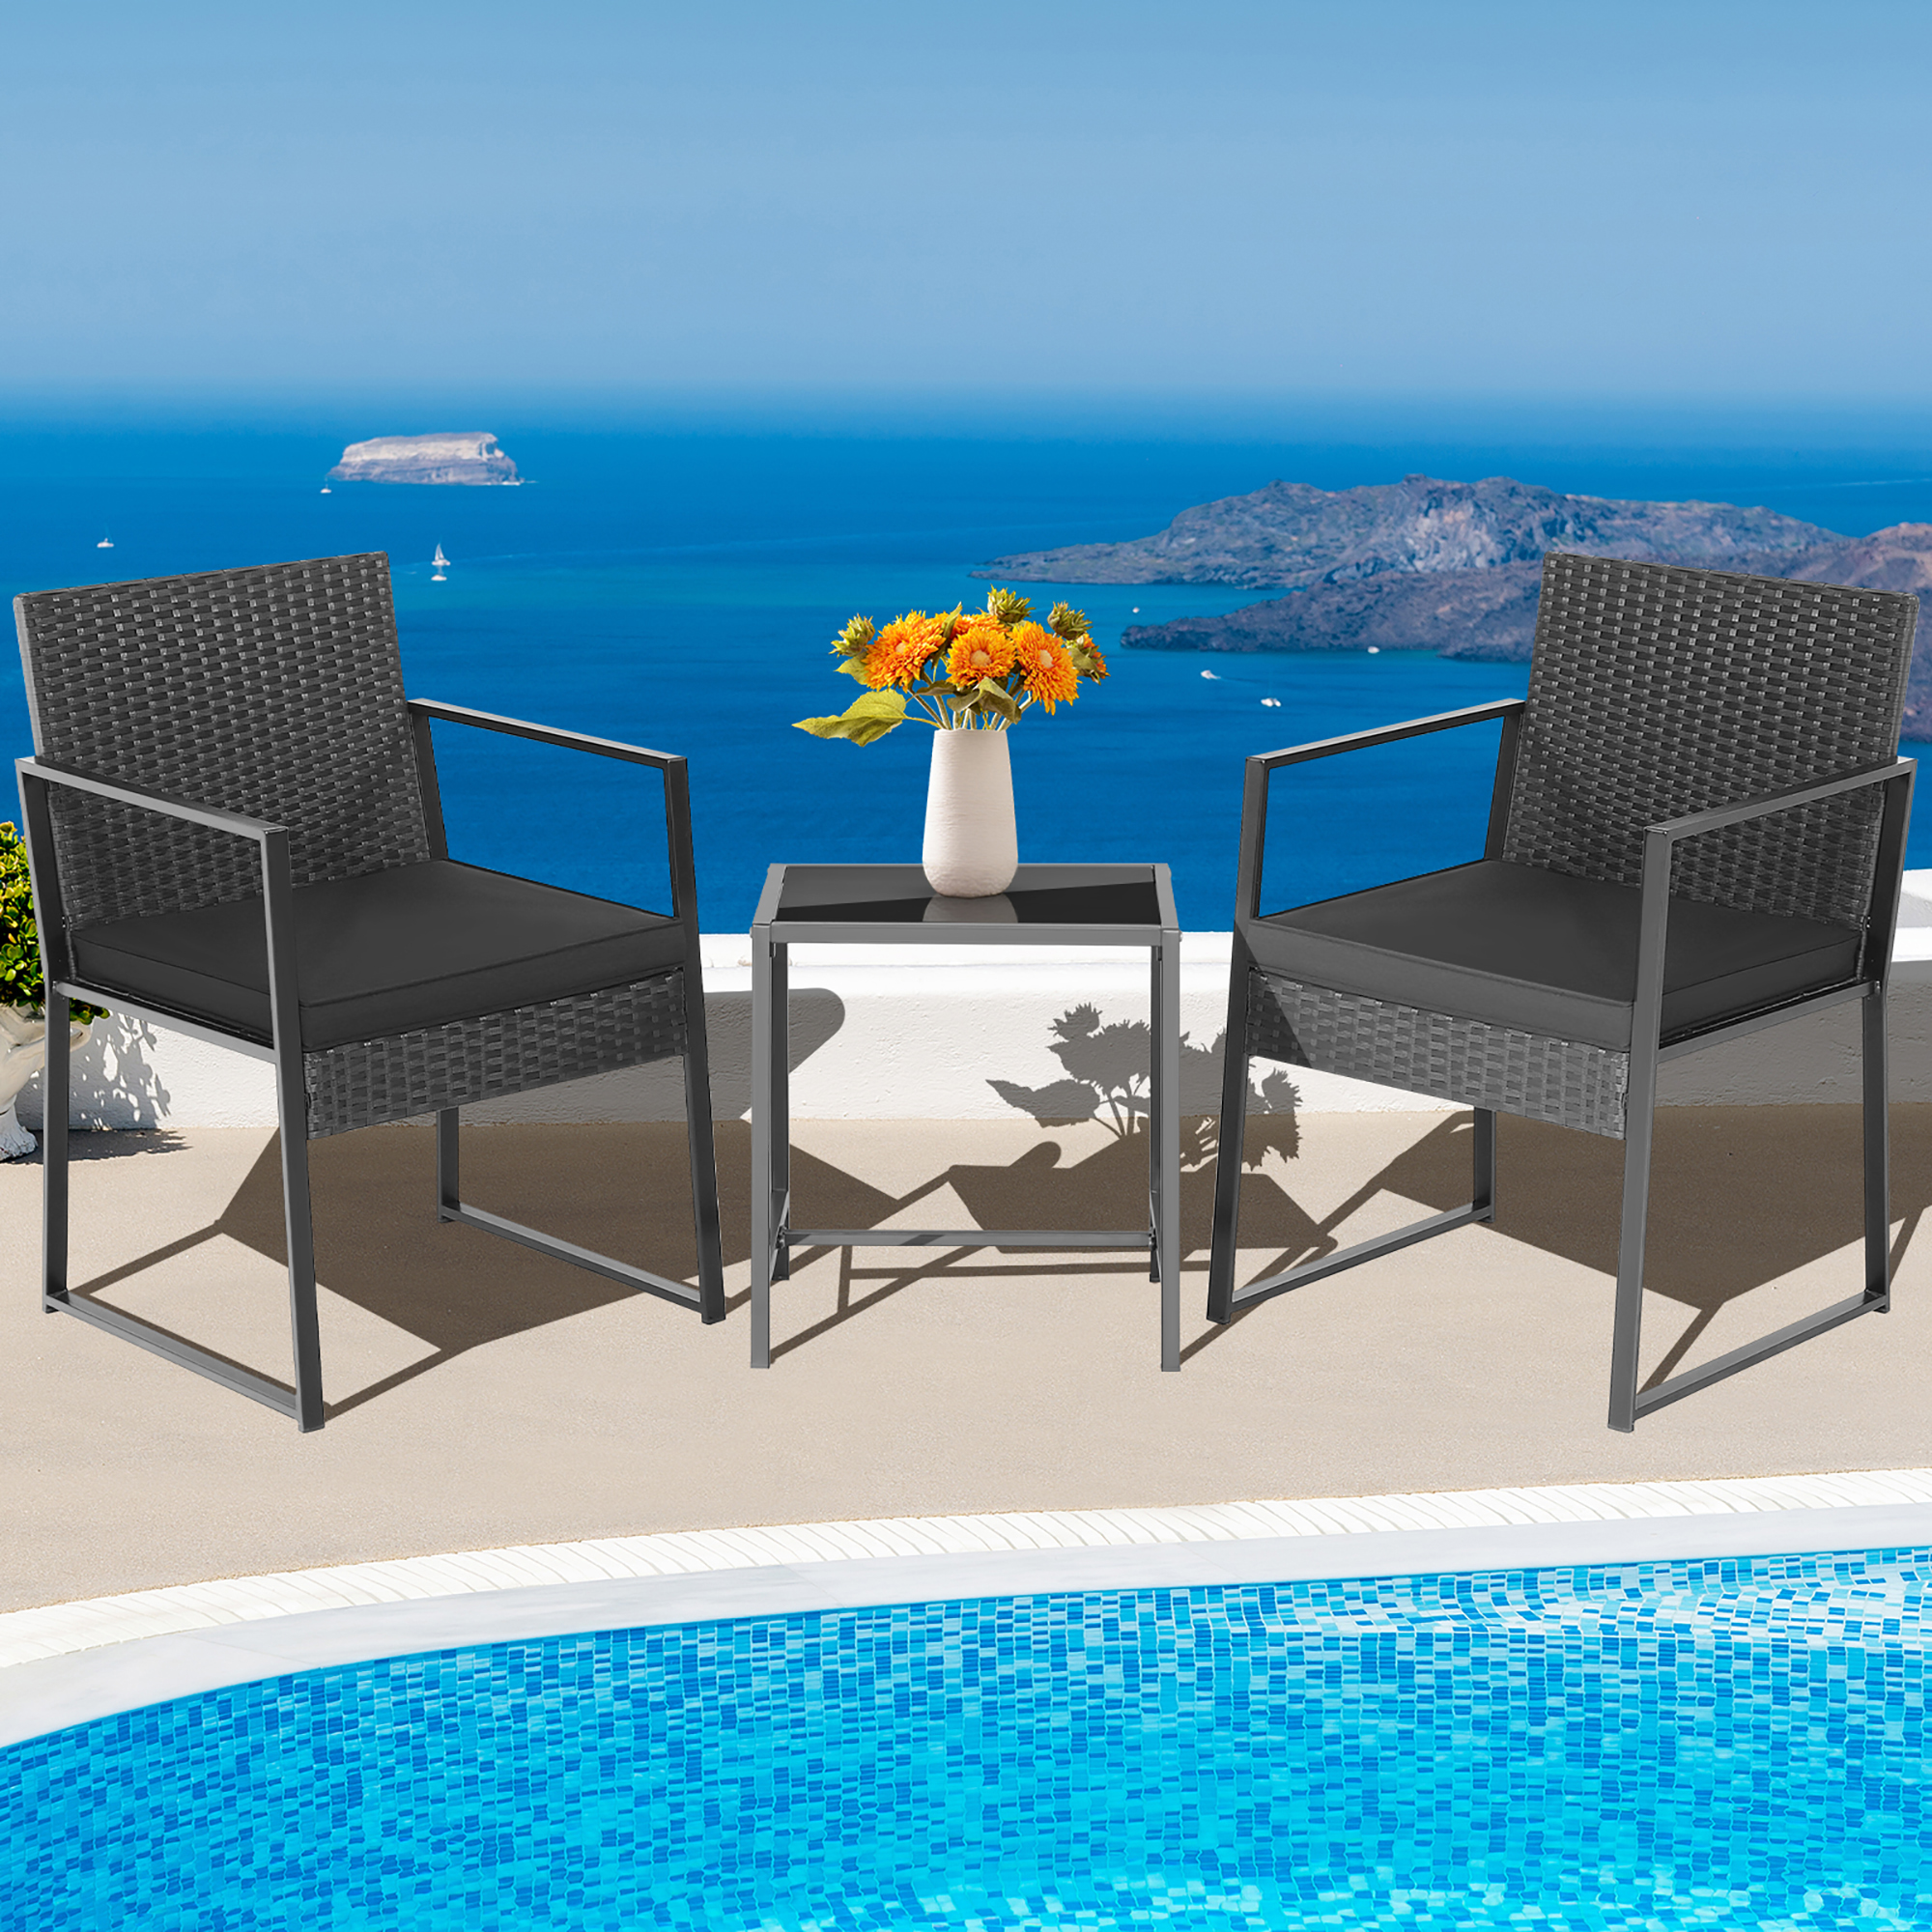 Costway 3pcs Patio Furniture Set Heavy Duty Cushioned Wicker Rattan Chairs Table Outdoor - image 1 of 10